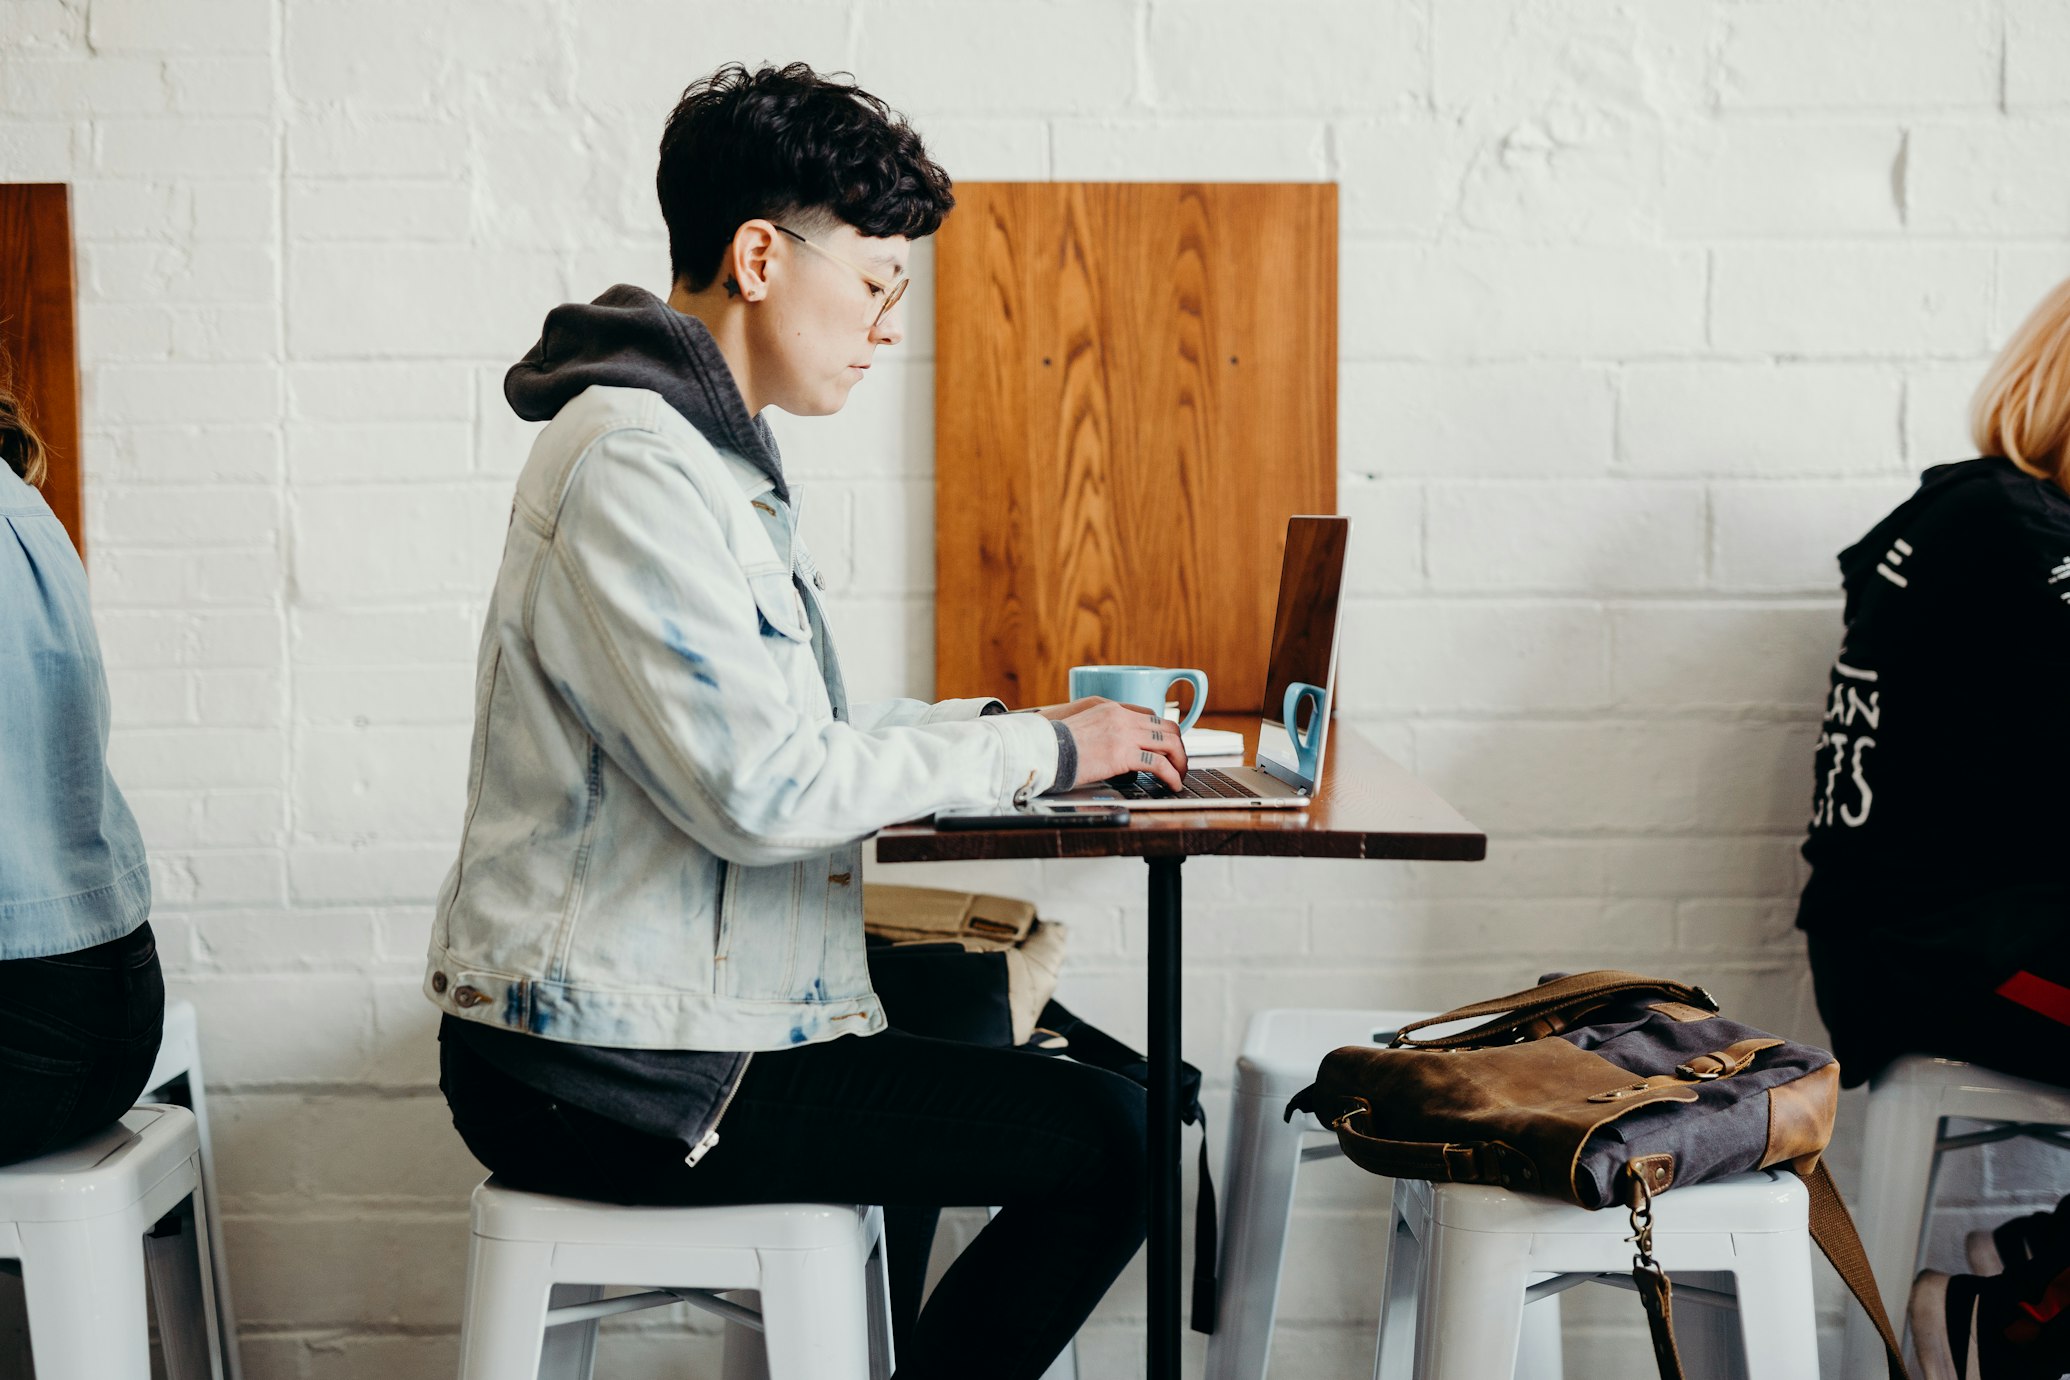 non-binary person working on their laptop in a coffee shop